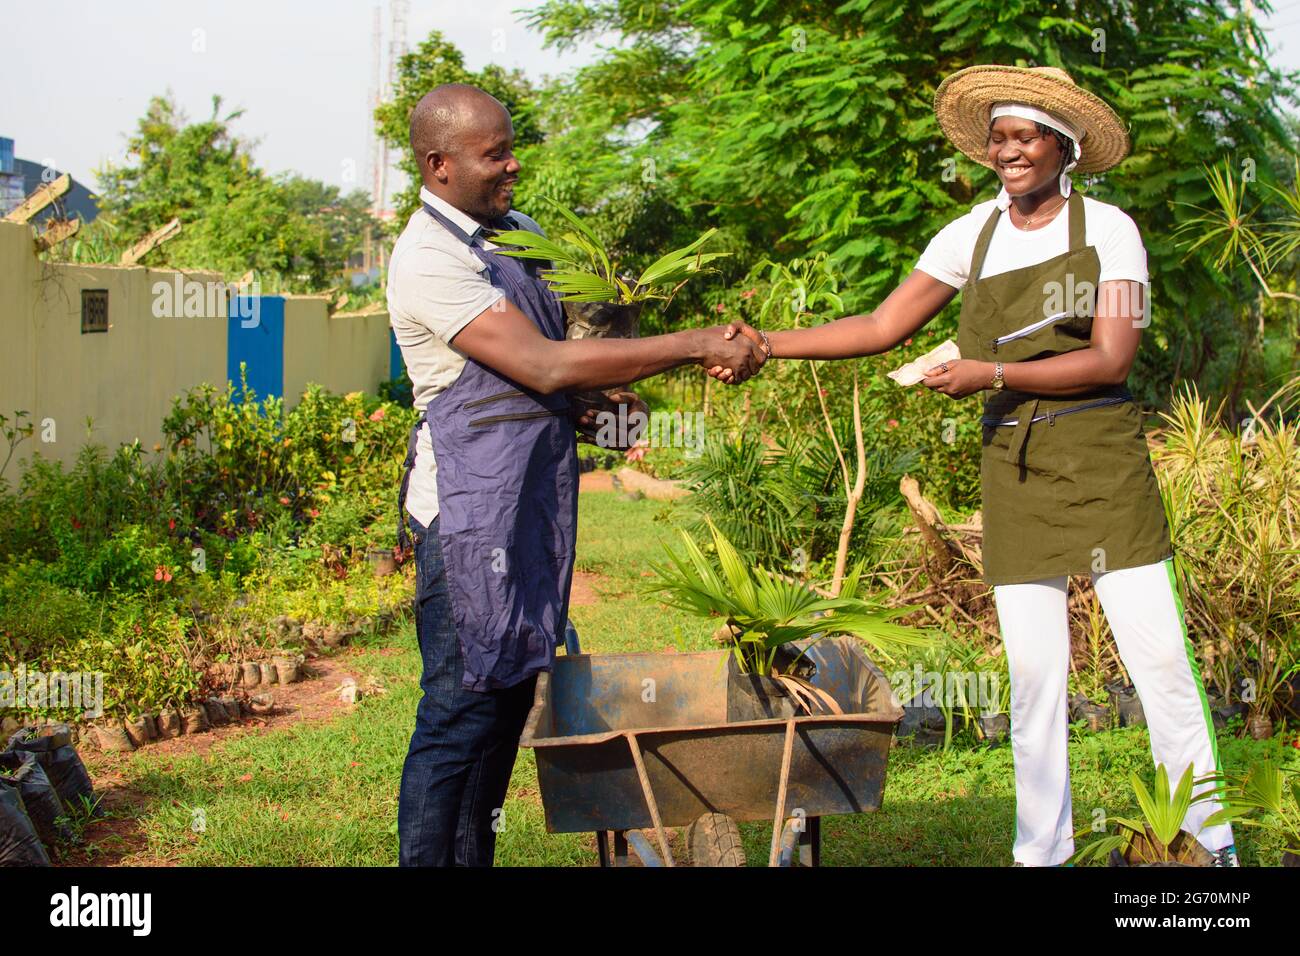 African female and male gardener, florist or horticulturist working together in a garden filled with variety of colorful flowers and plants, exchangin Stock Photo